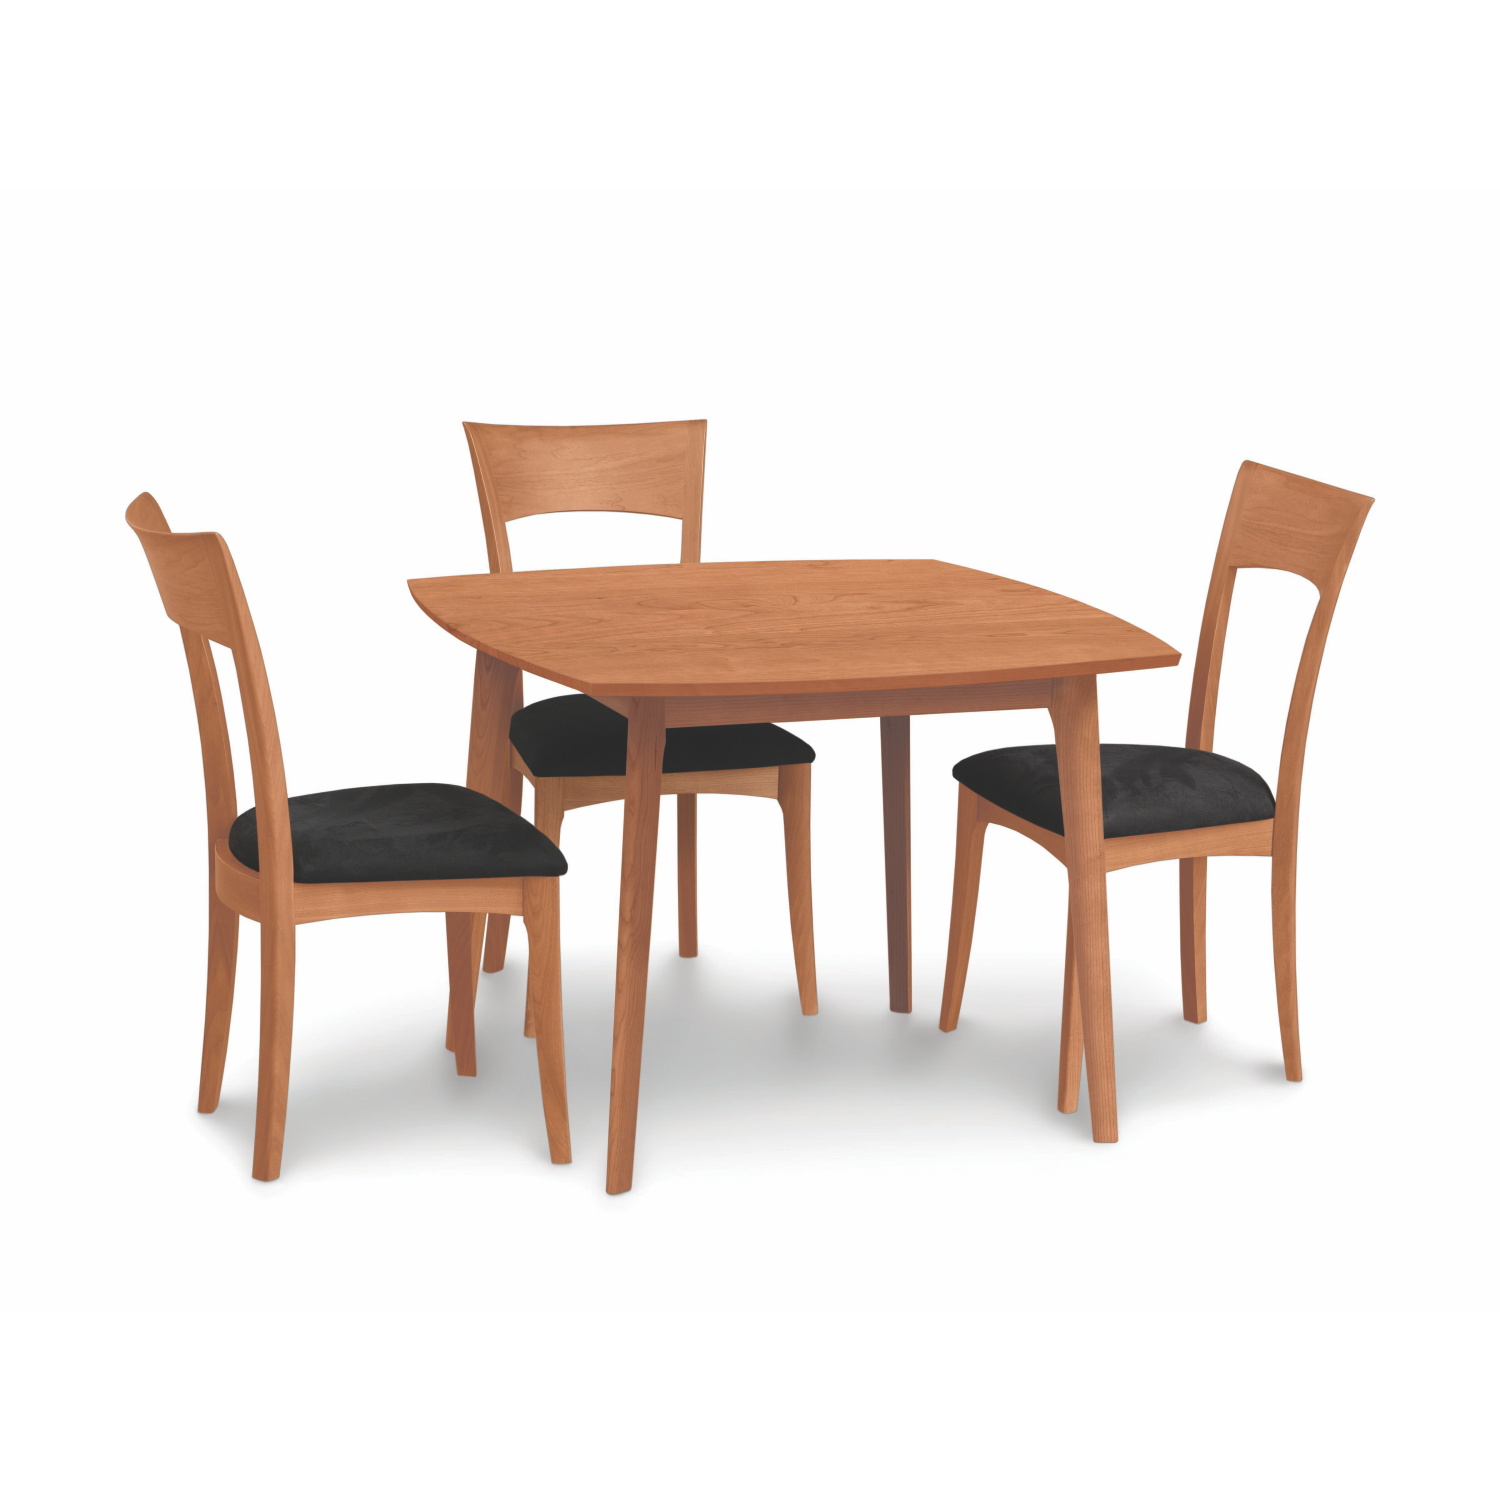 Catalina Dining Table Cherry Image with Chairs